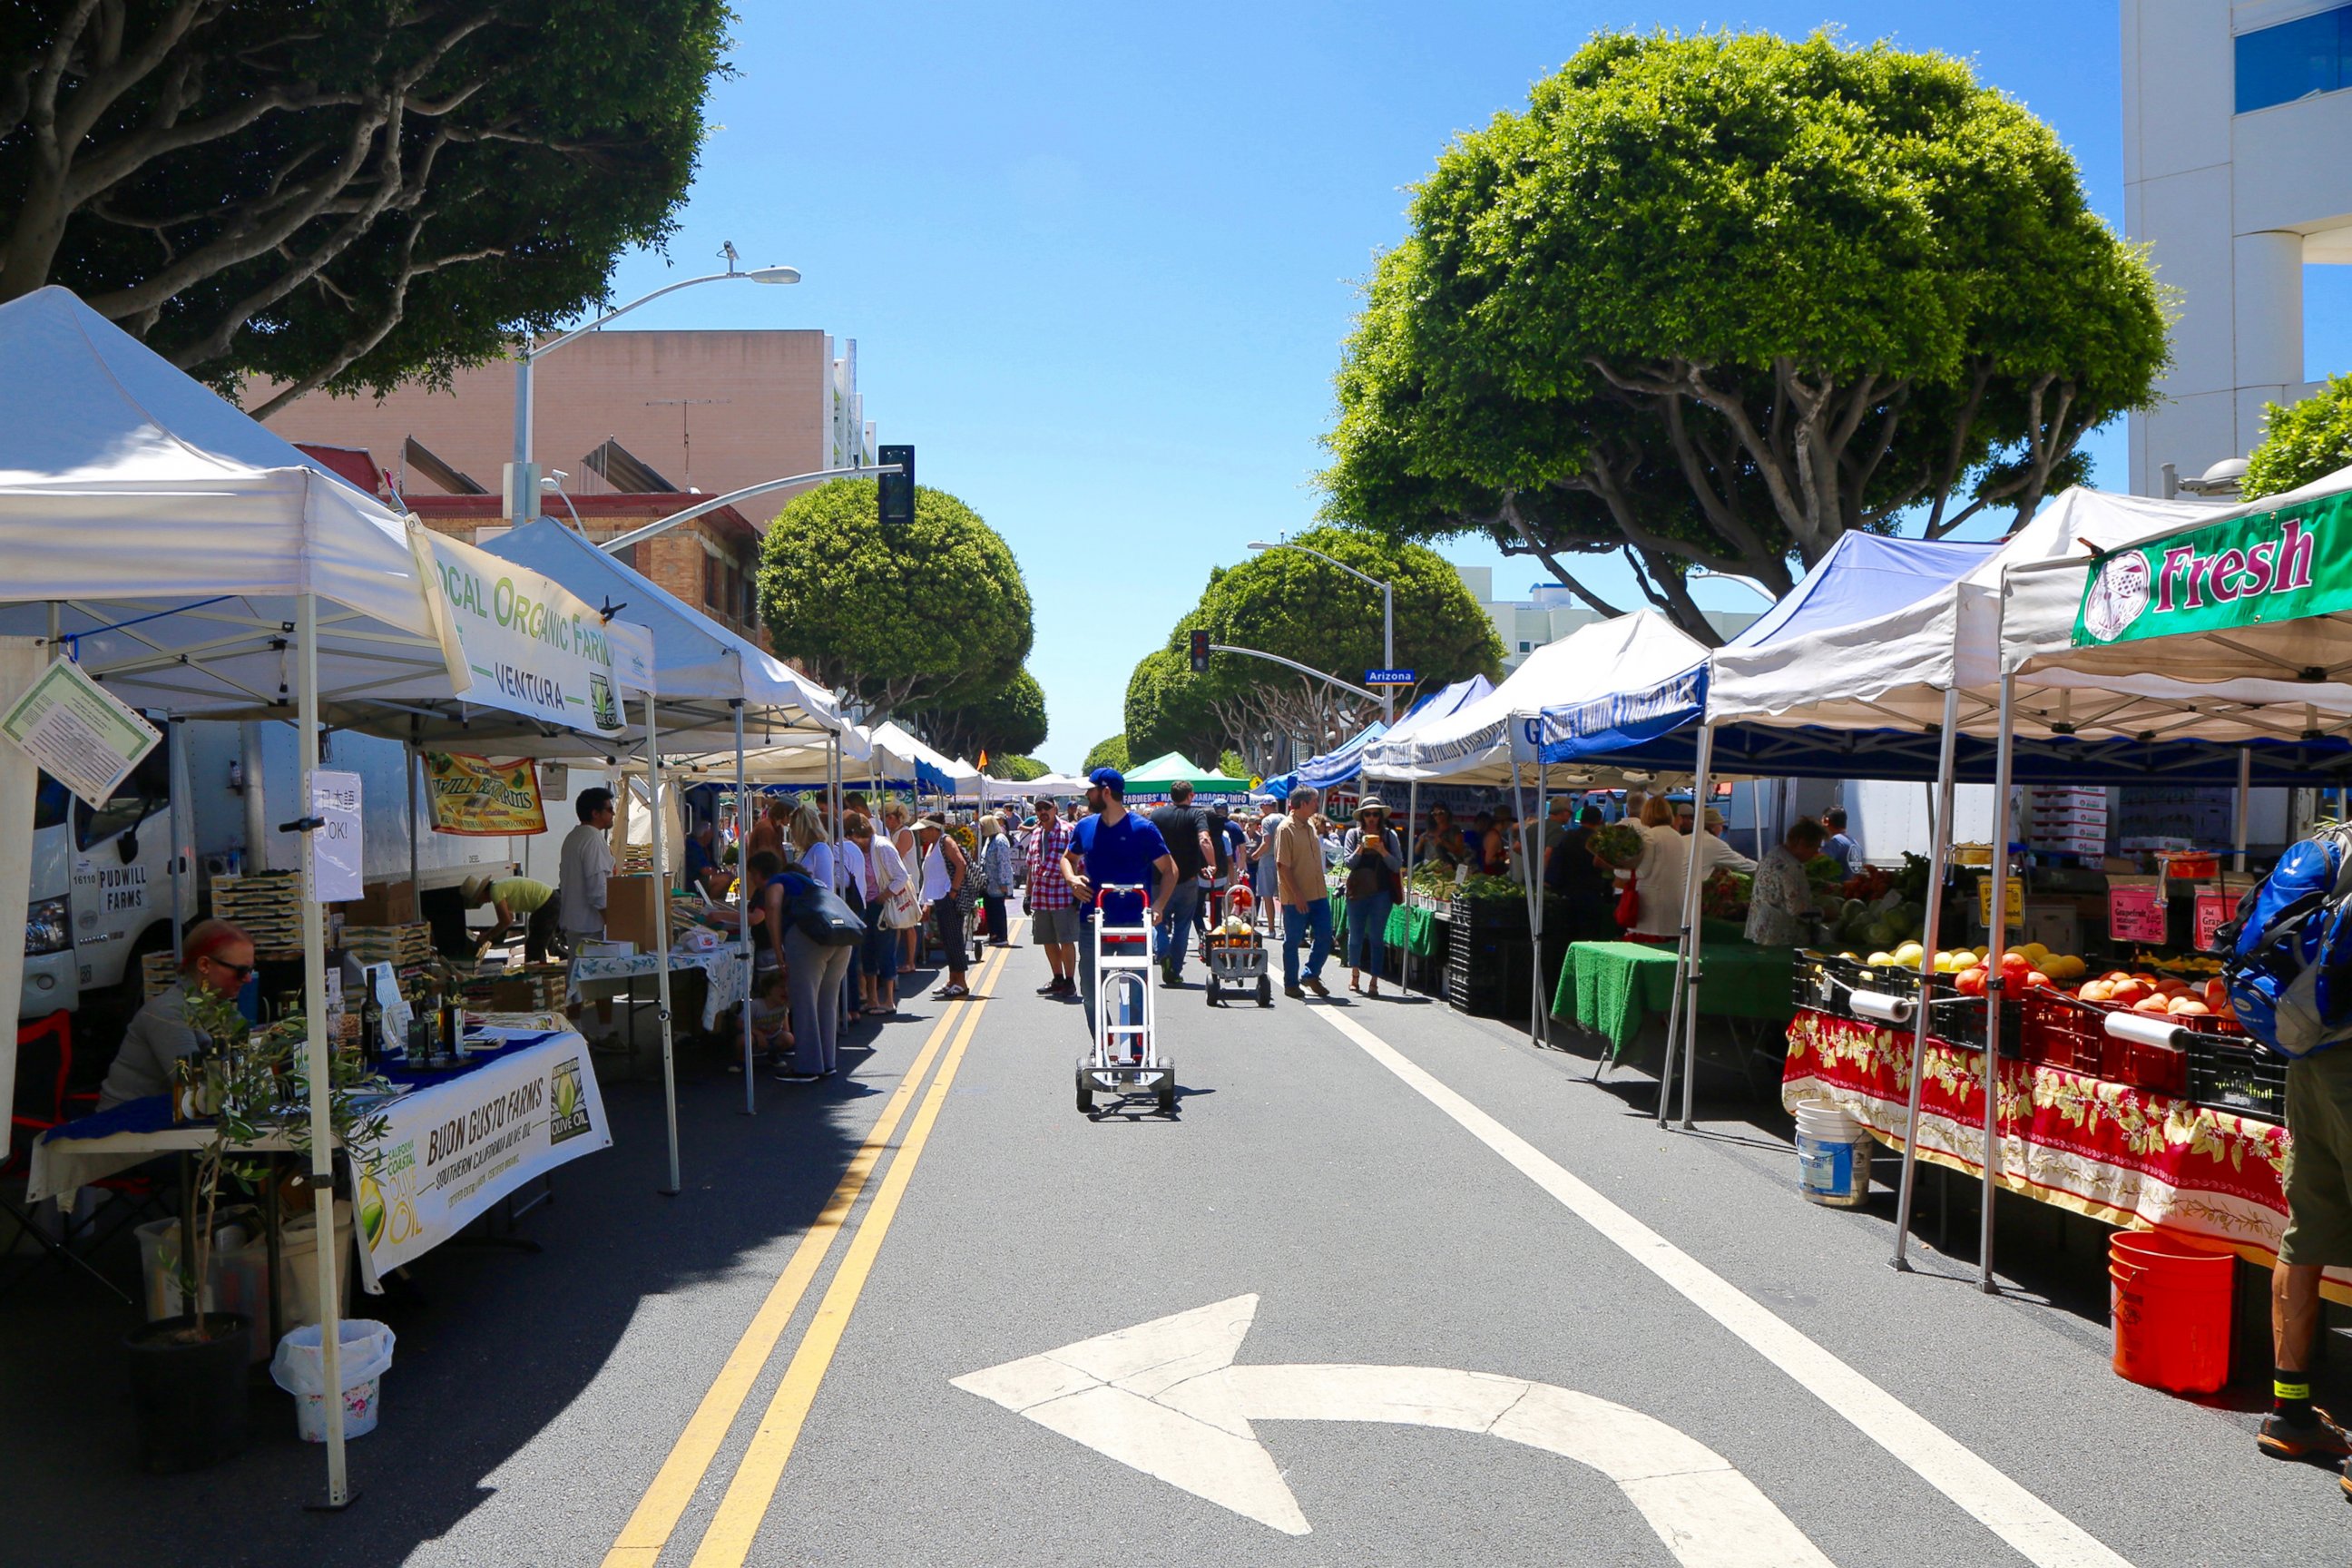 PHOTO: The Santa Monica Farmers' Market in Los Angeles, seen here on June 14, 2017, started in 1981.